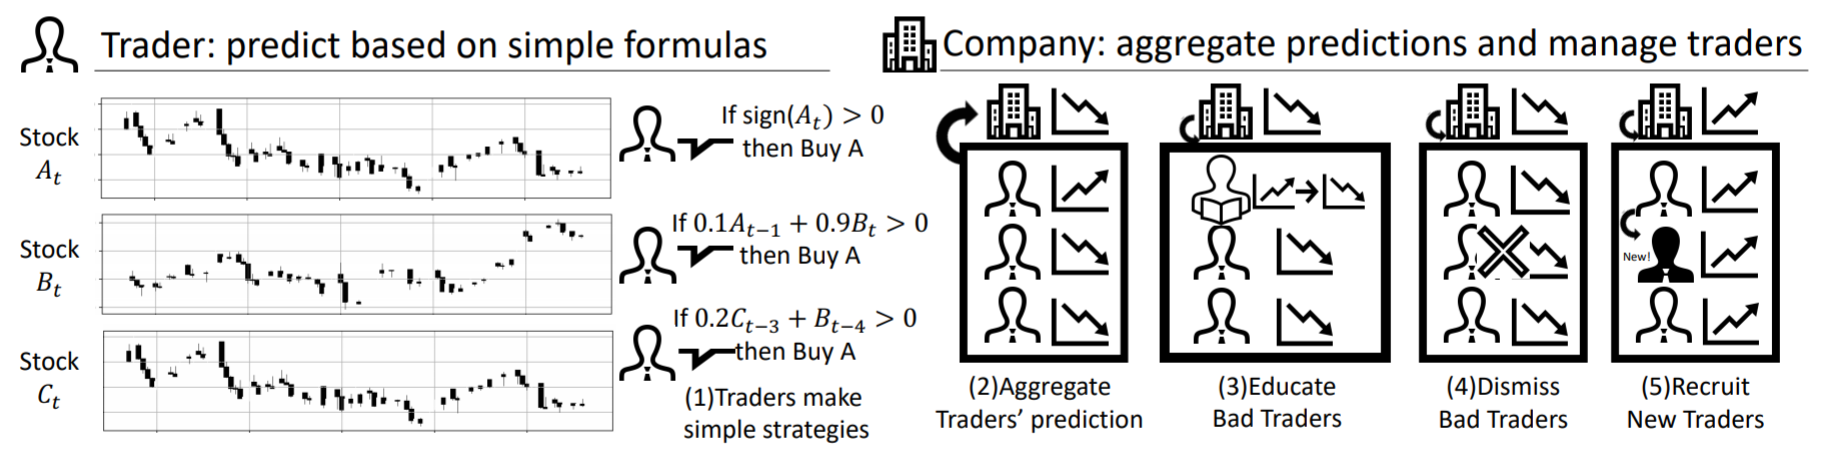 trader_company_figure.png